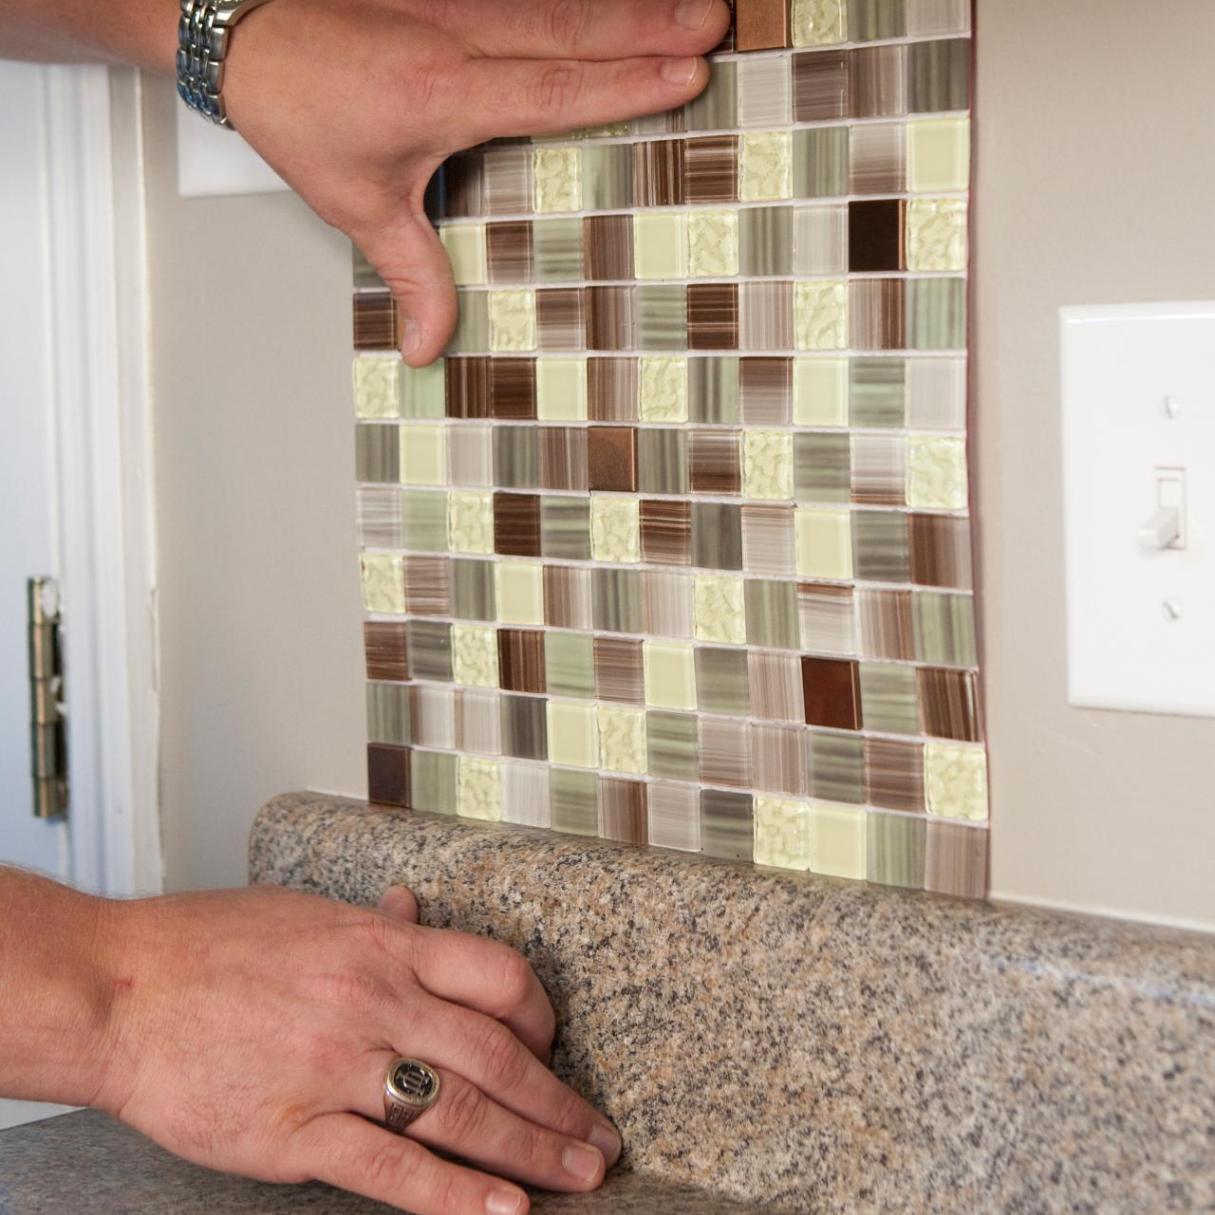 How To Cut Peel And Stick Backsplash Around Outlets